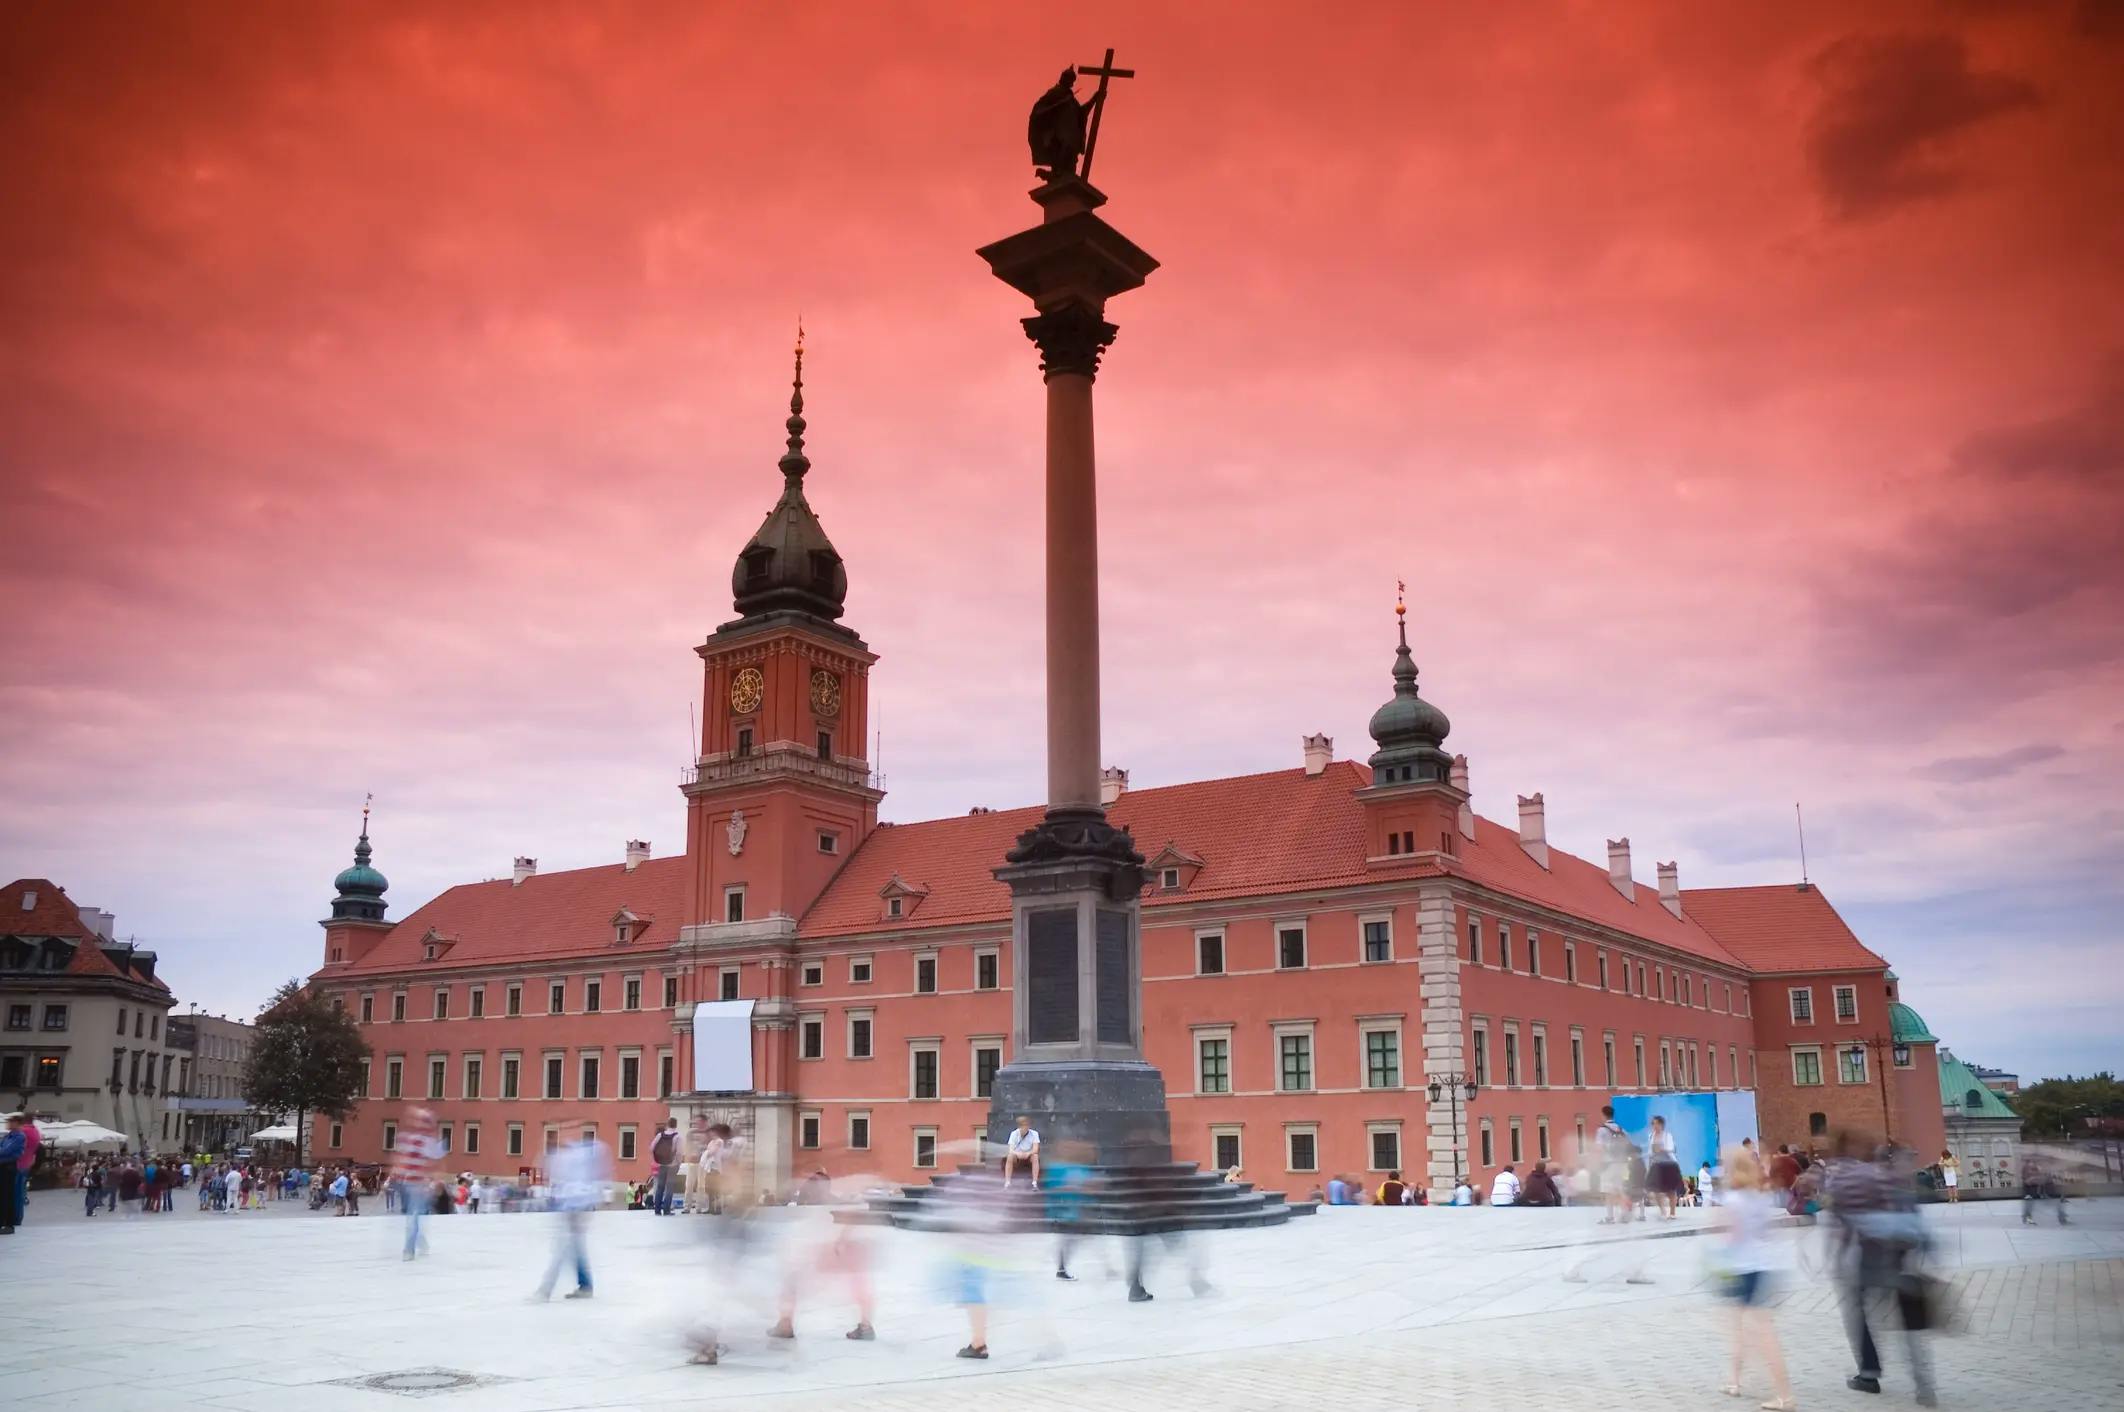 The Royal Castle in Warsaw image